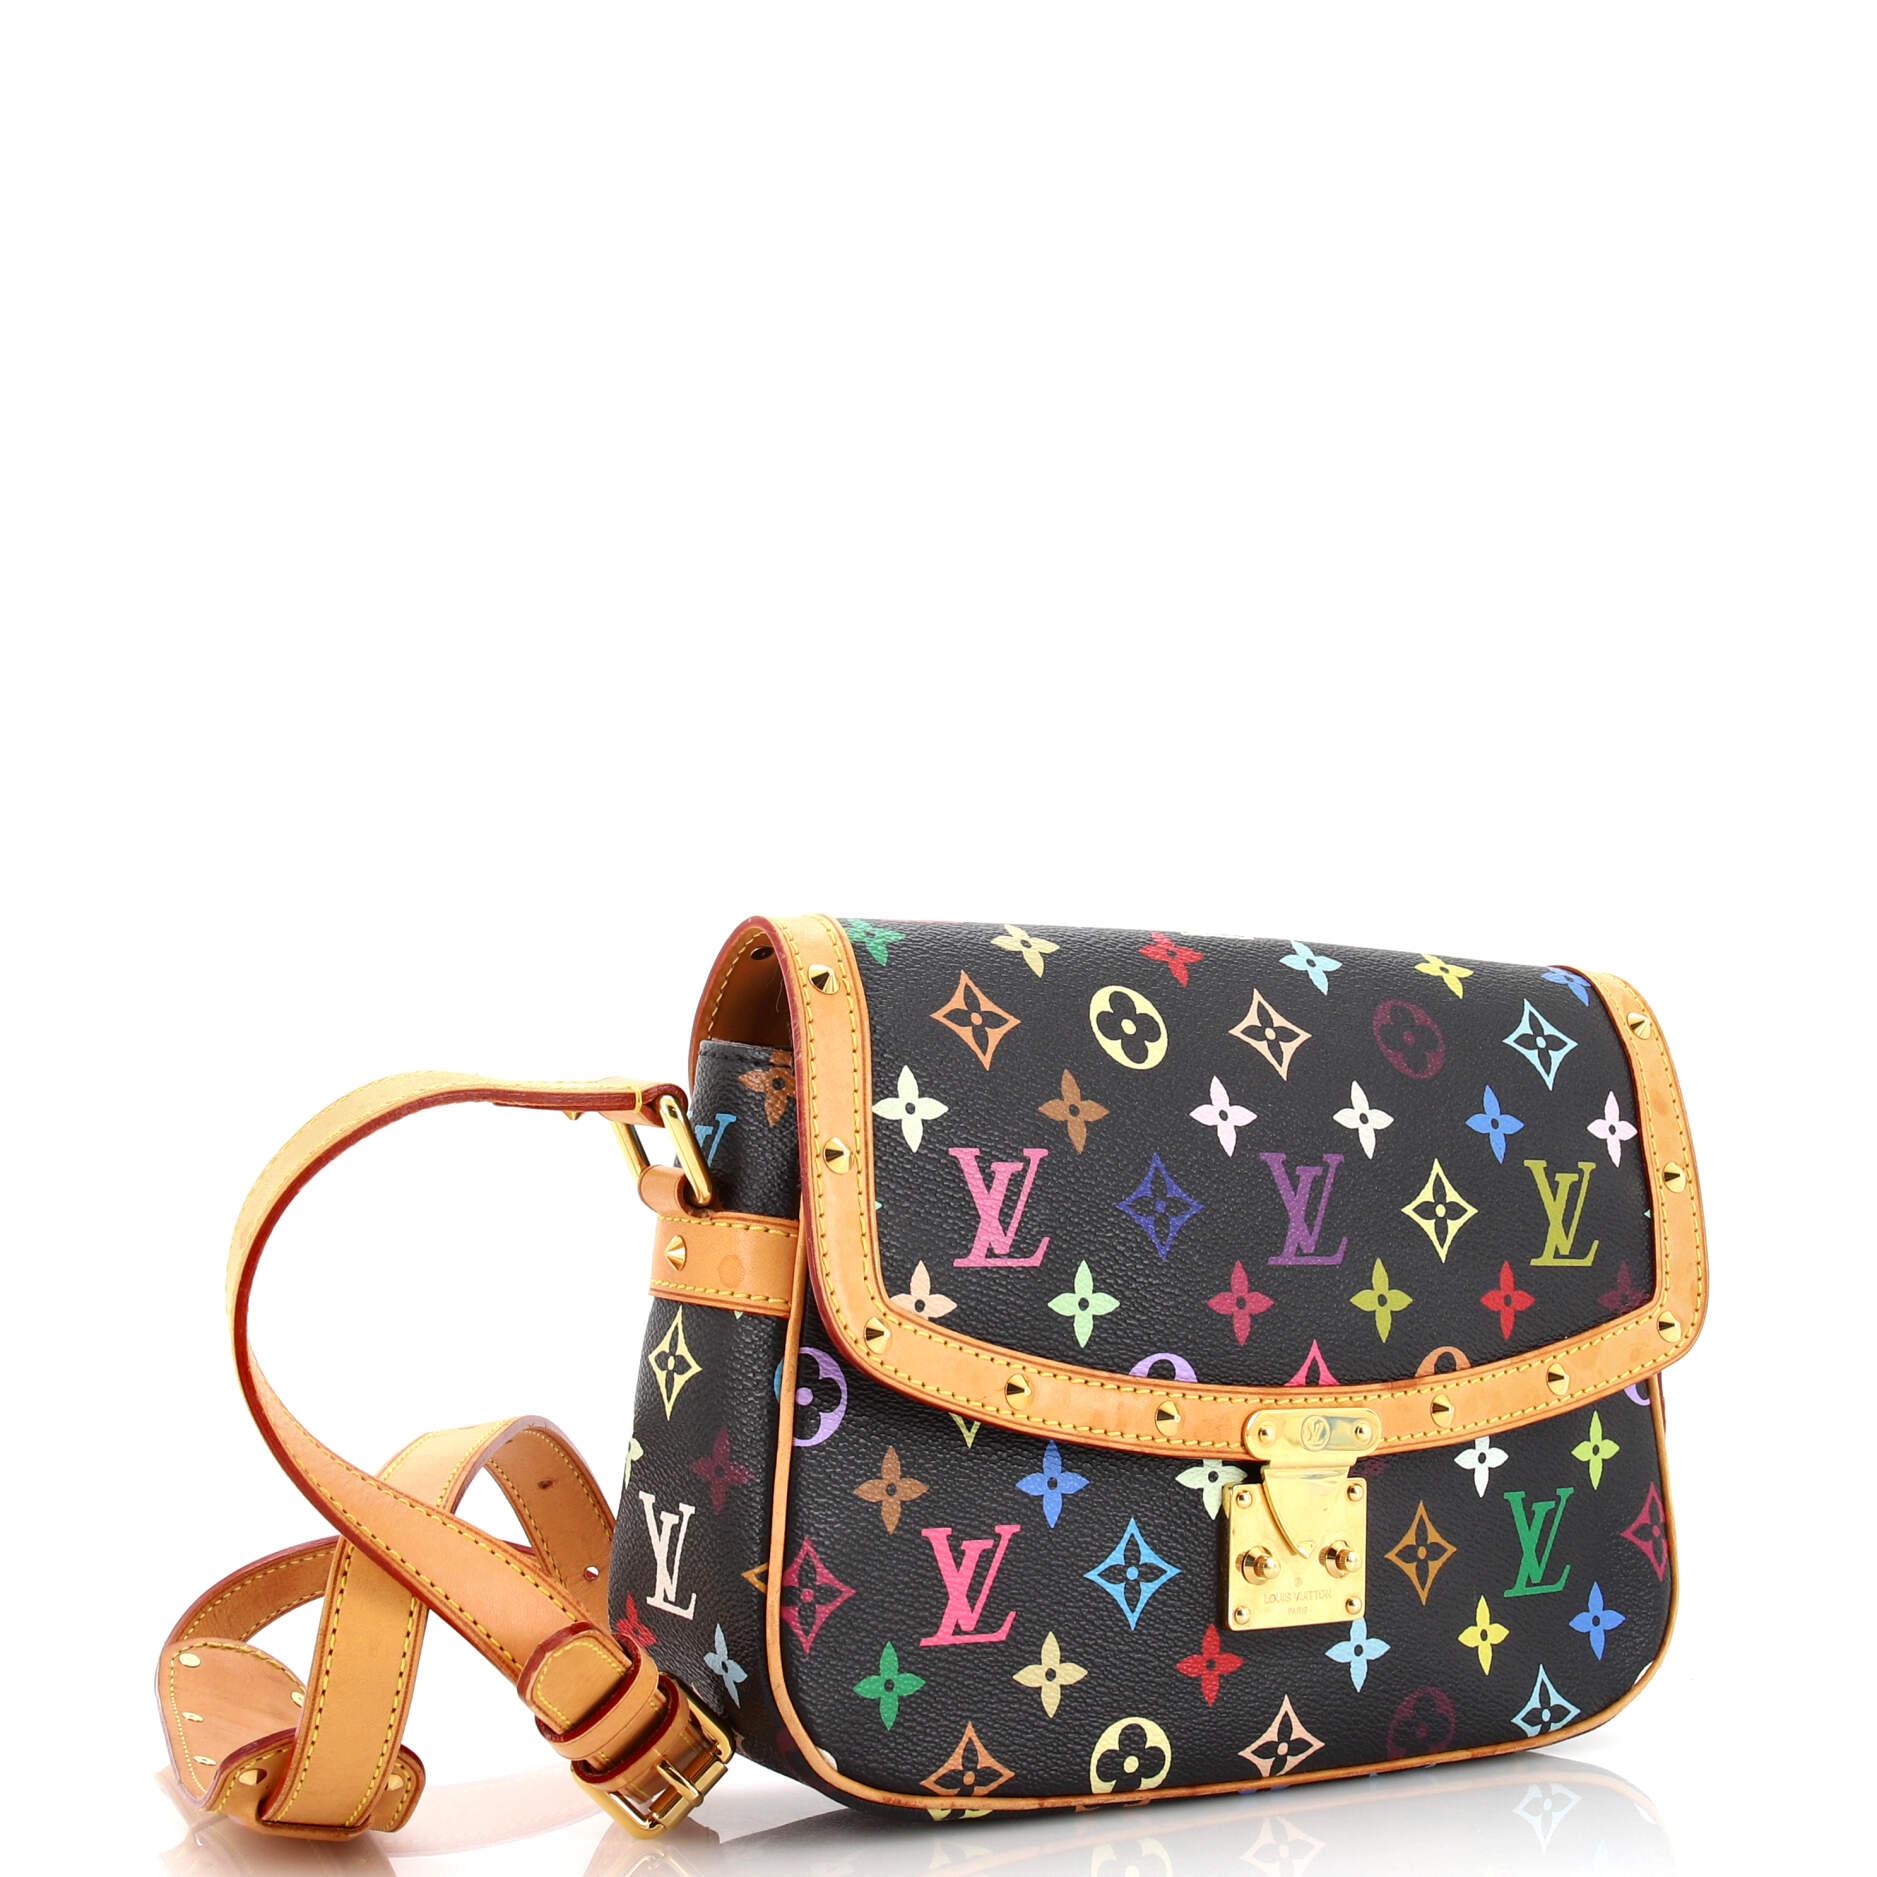 What do you think of this lv multicolor sologne? : r/Louisvuitton